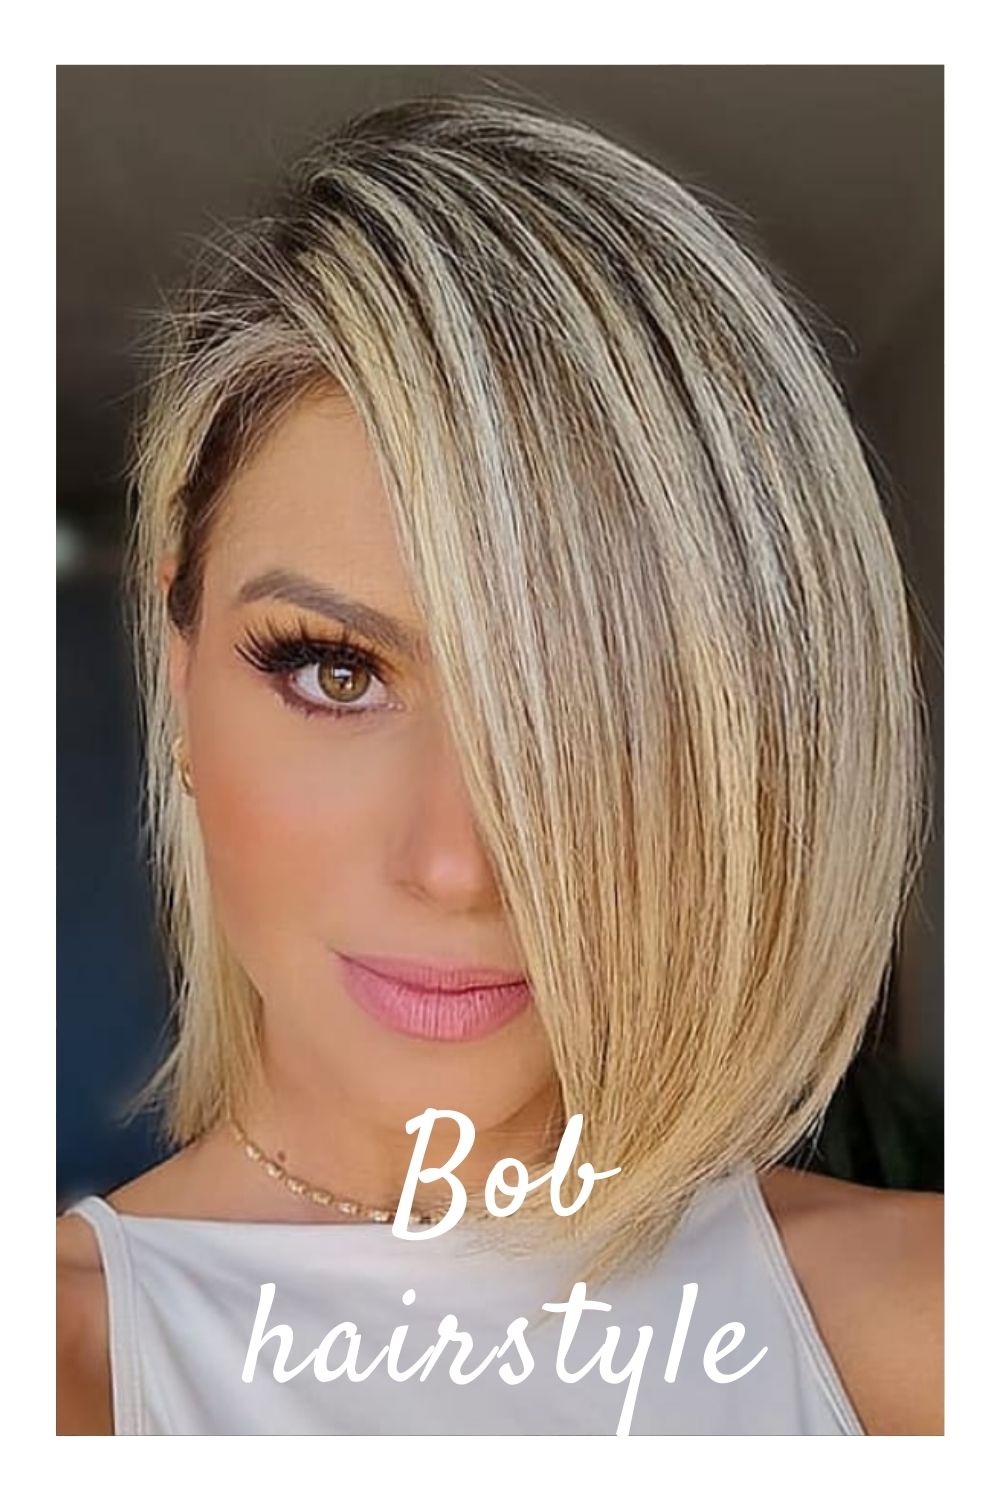 27 Best Bob Short Hair and Hairstyles for Women 2021